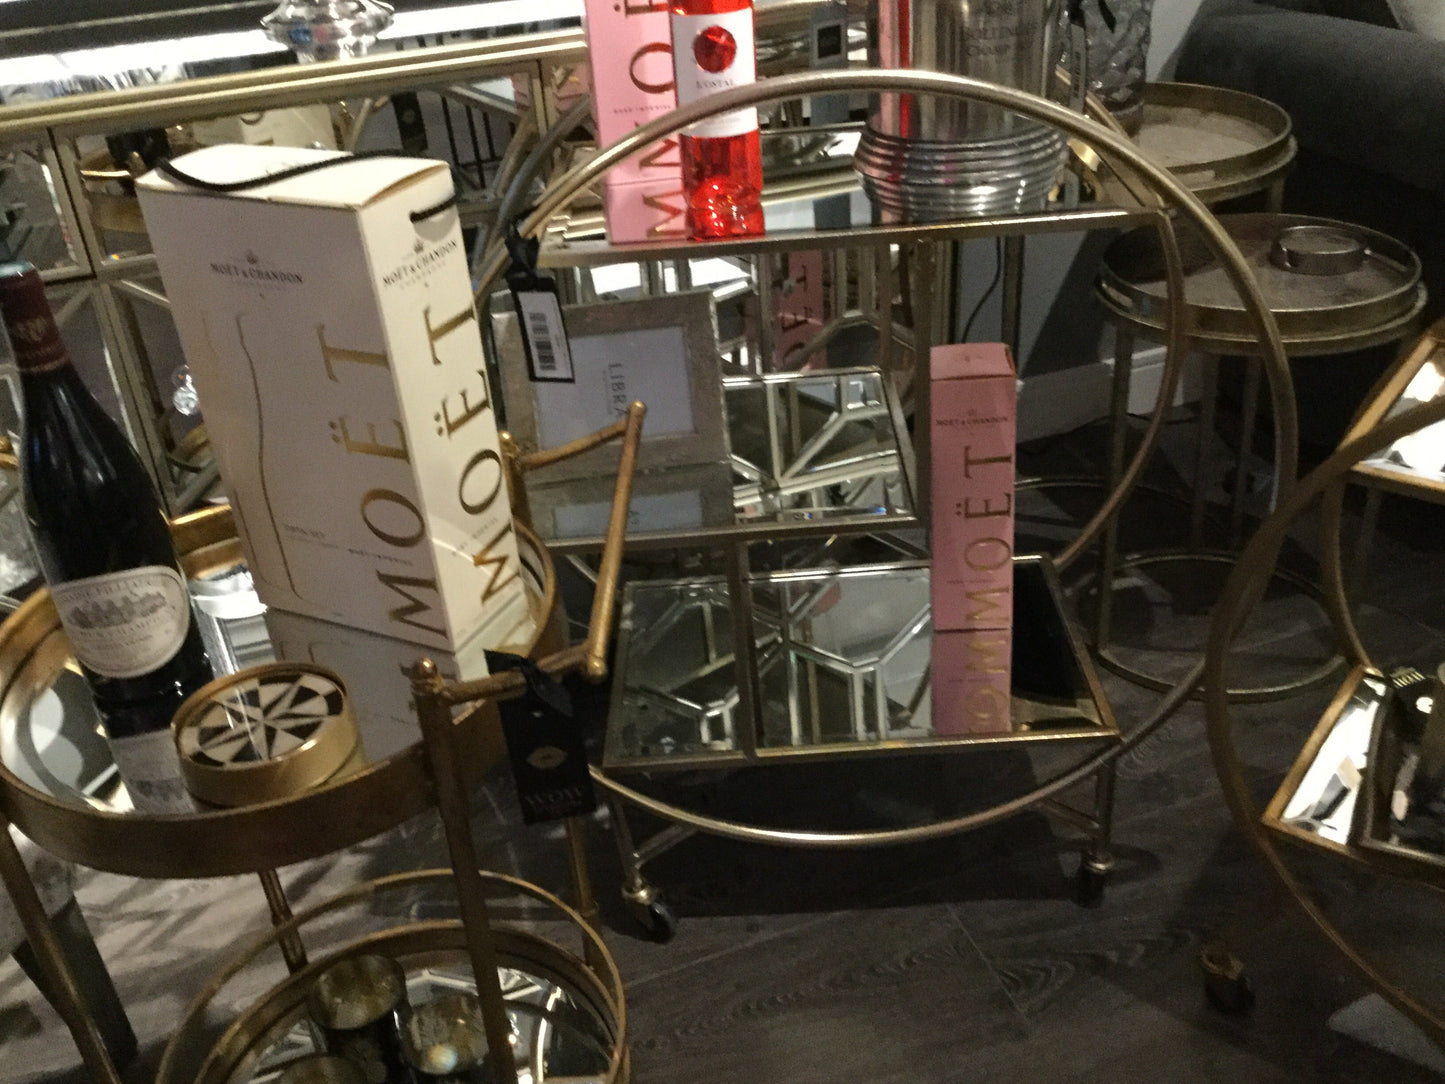 Bar cart trolley gold champagne for collection